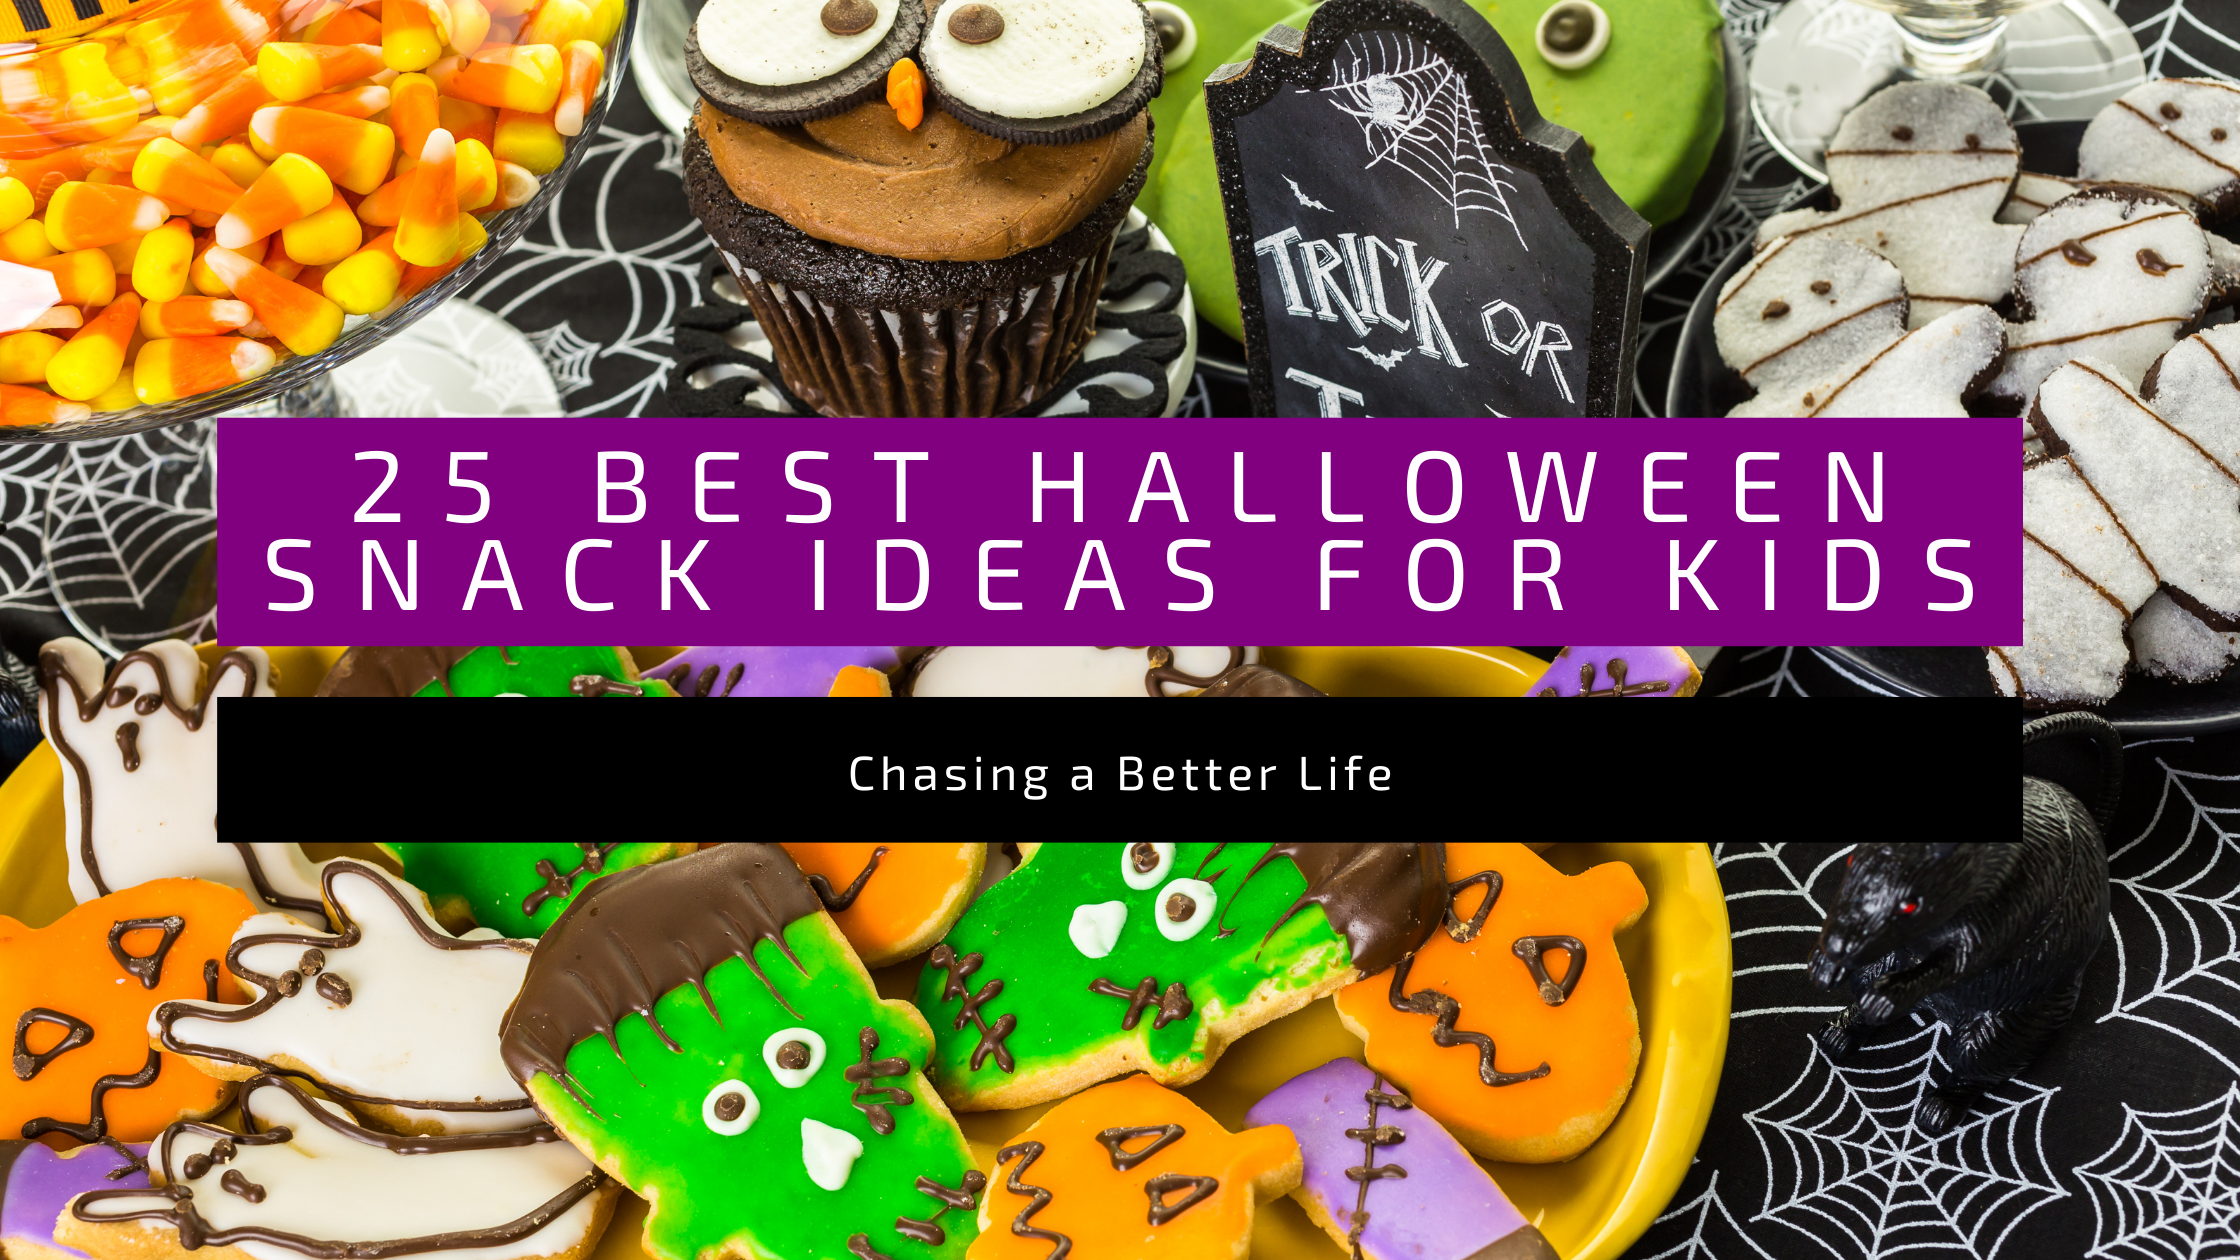 The 25 Best Halloween Snack Ideas for Kids 3